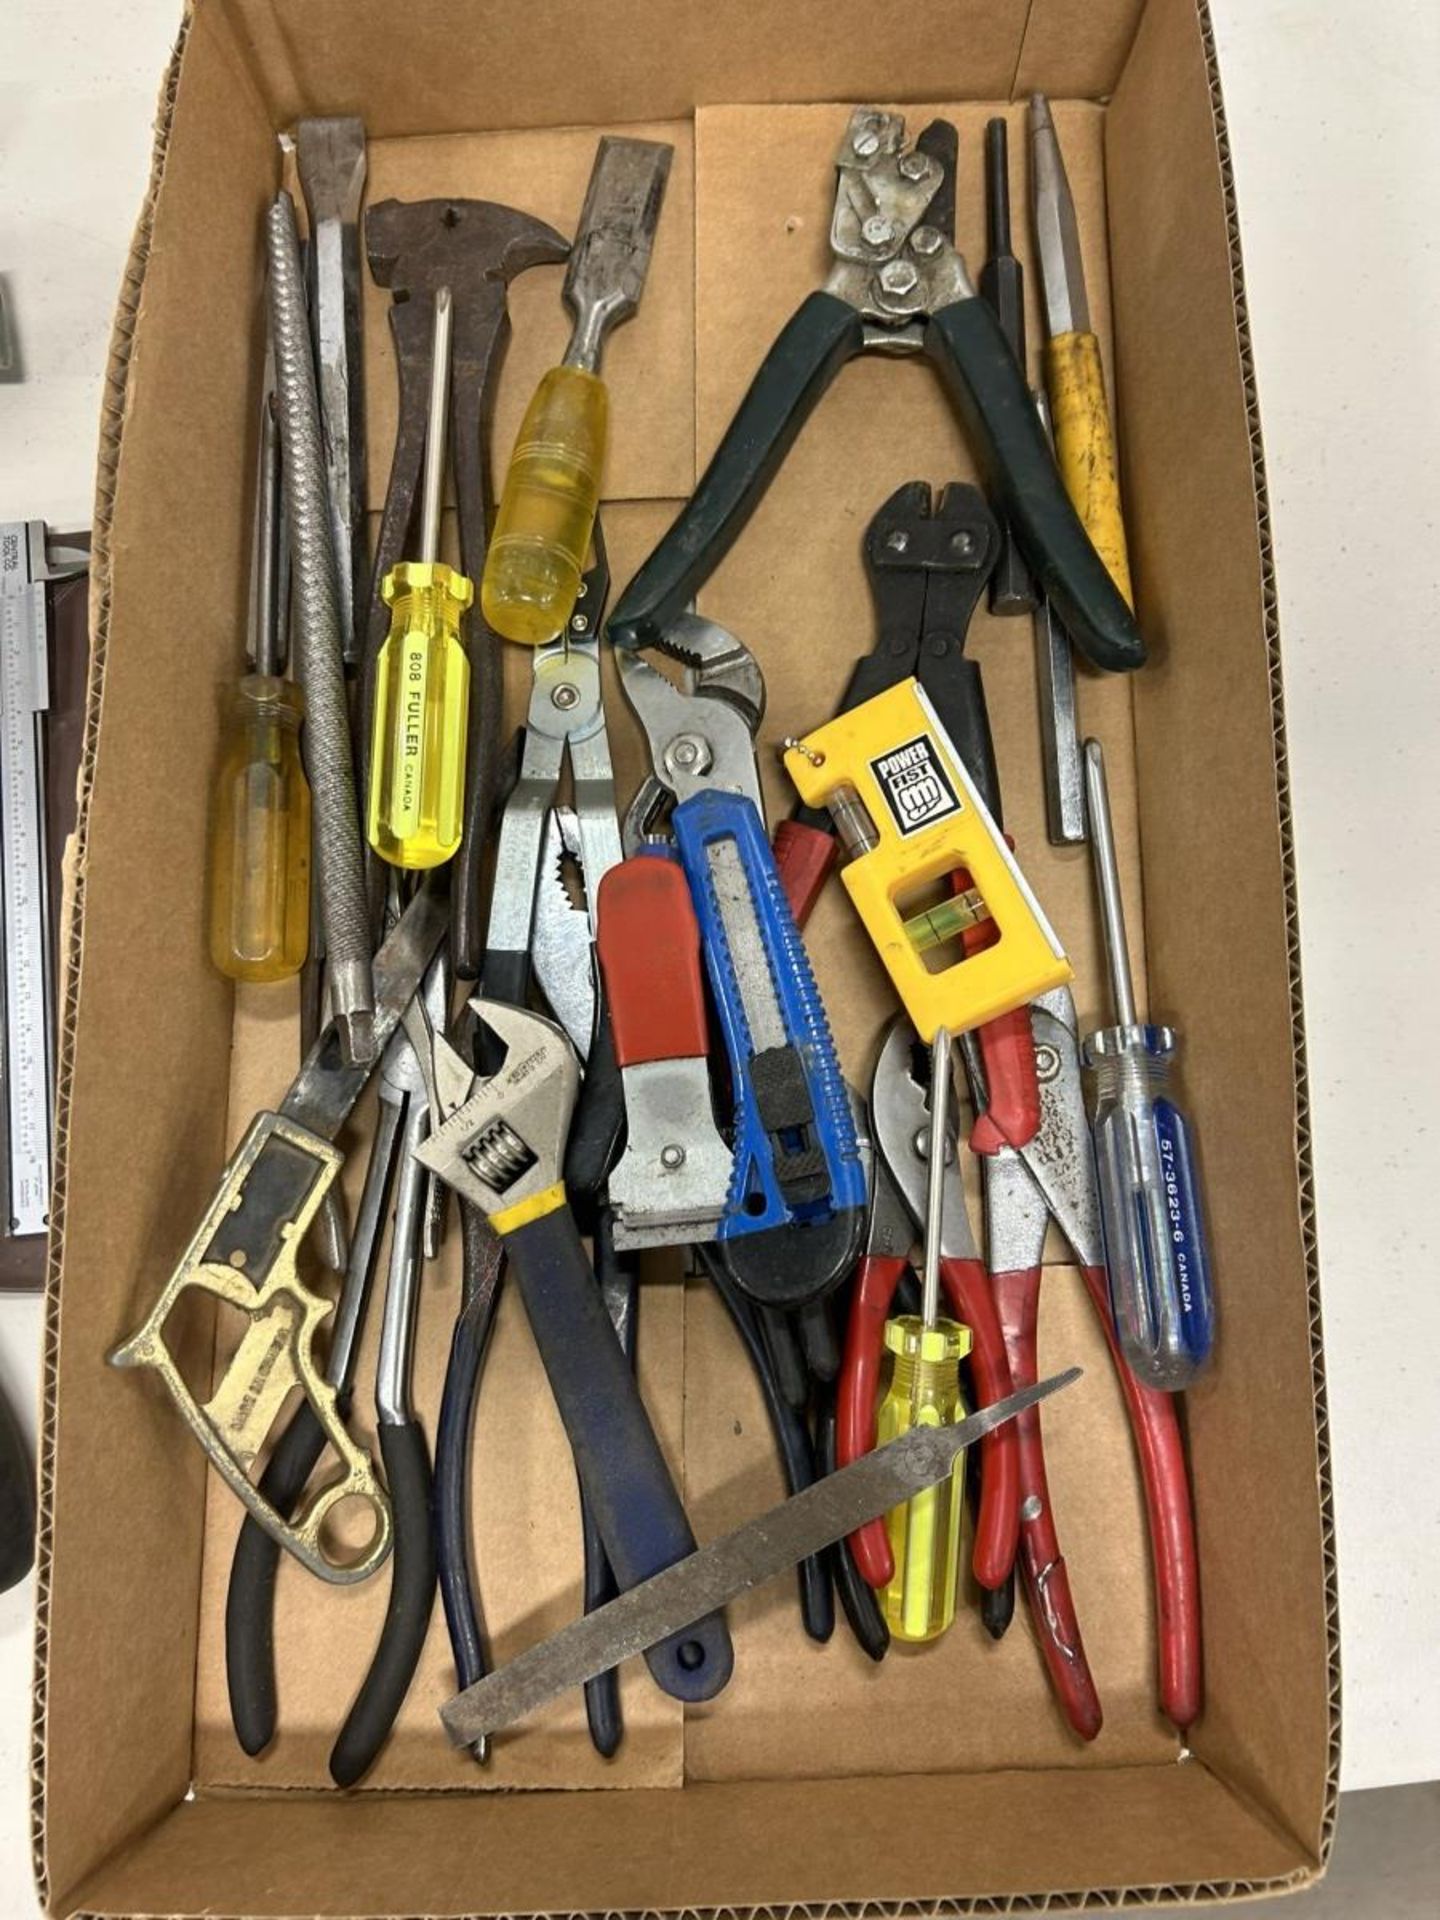 L/O ASSORTED HAND TOOLS PLIERS, VICE GRIPS, BLUE POINT RETAINING RING PLIERS ETC. - Image 2 of 6